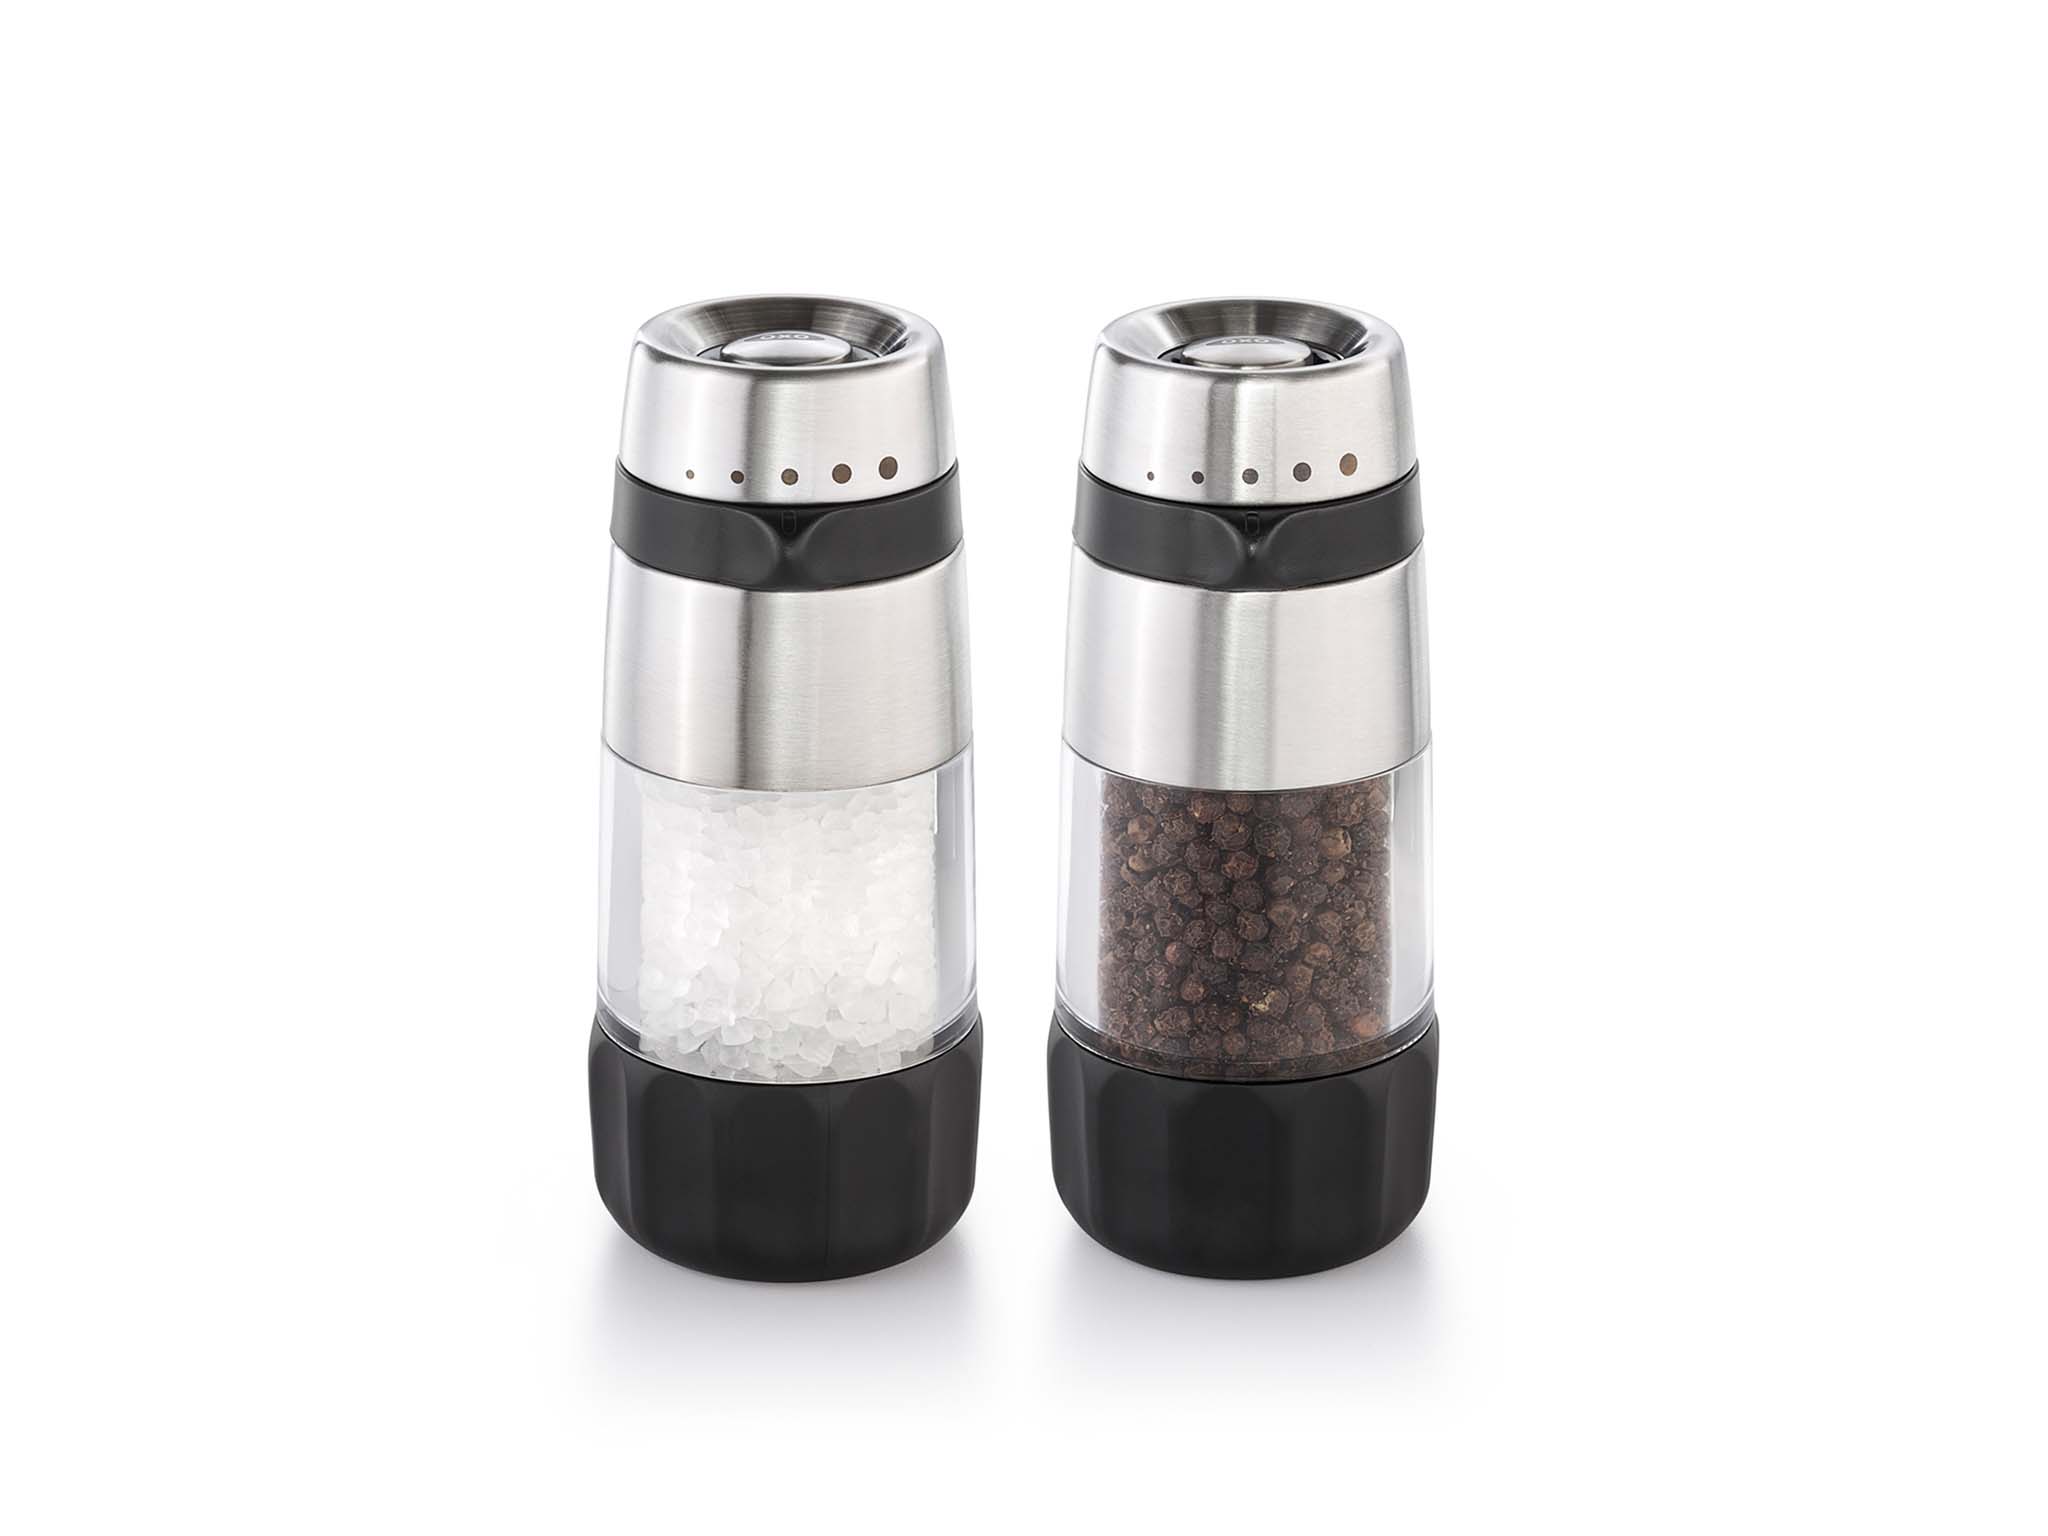 2 Millers Dual Charging Smart Timing Automatic Stainless Steel Salt Pepper Mill LED Lights Electric Salt and Pepper Grinder Set USB Rechargeable 